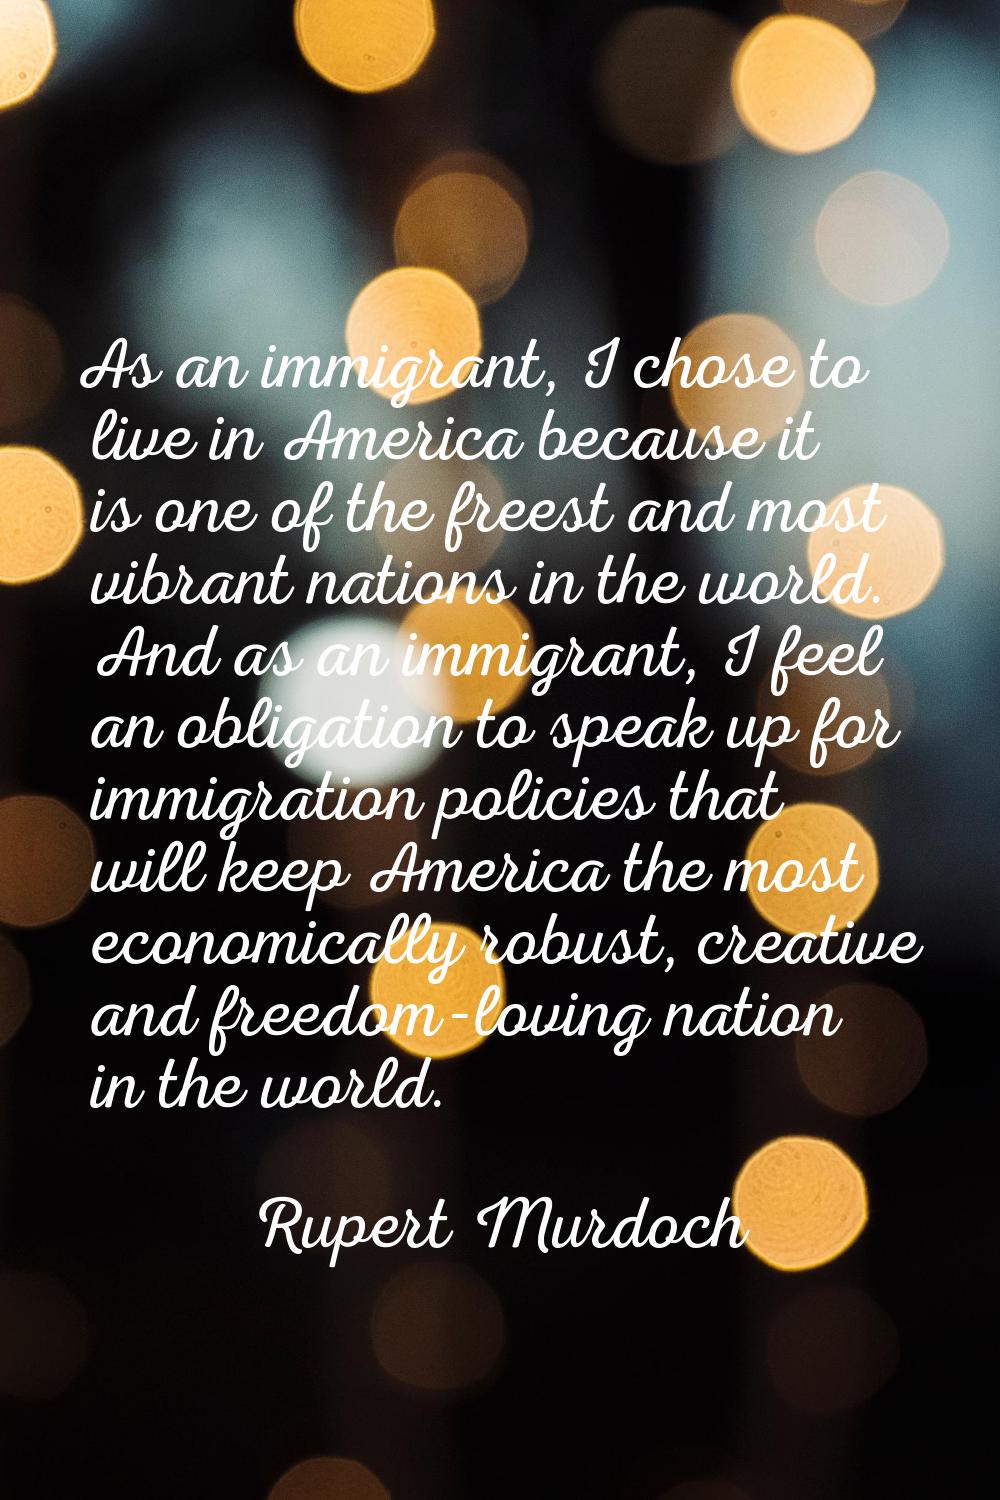 As an immigrant, I chose to live in America because it is one of the freest and most vibrant nation